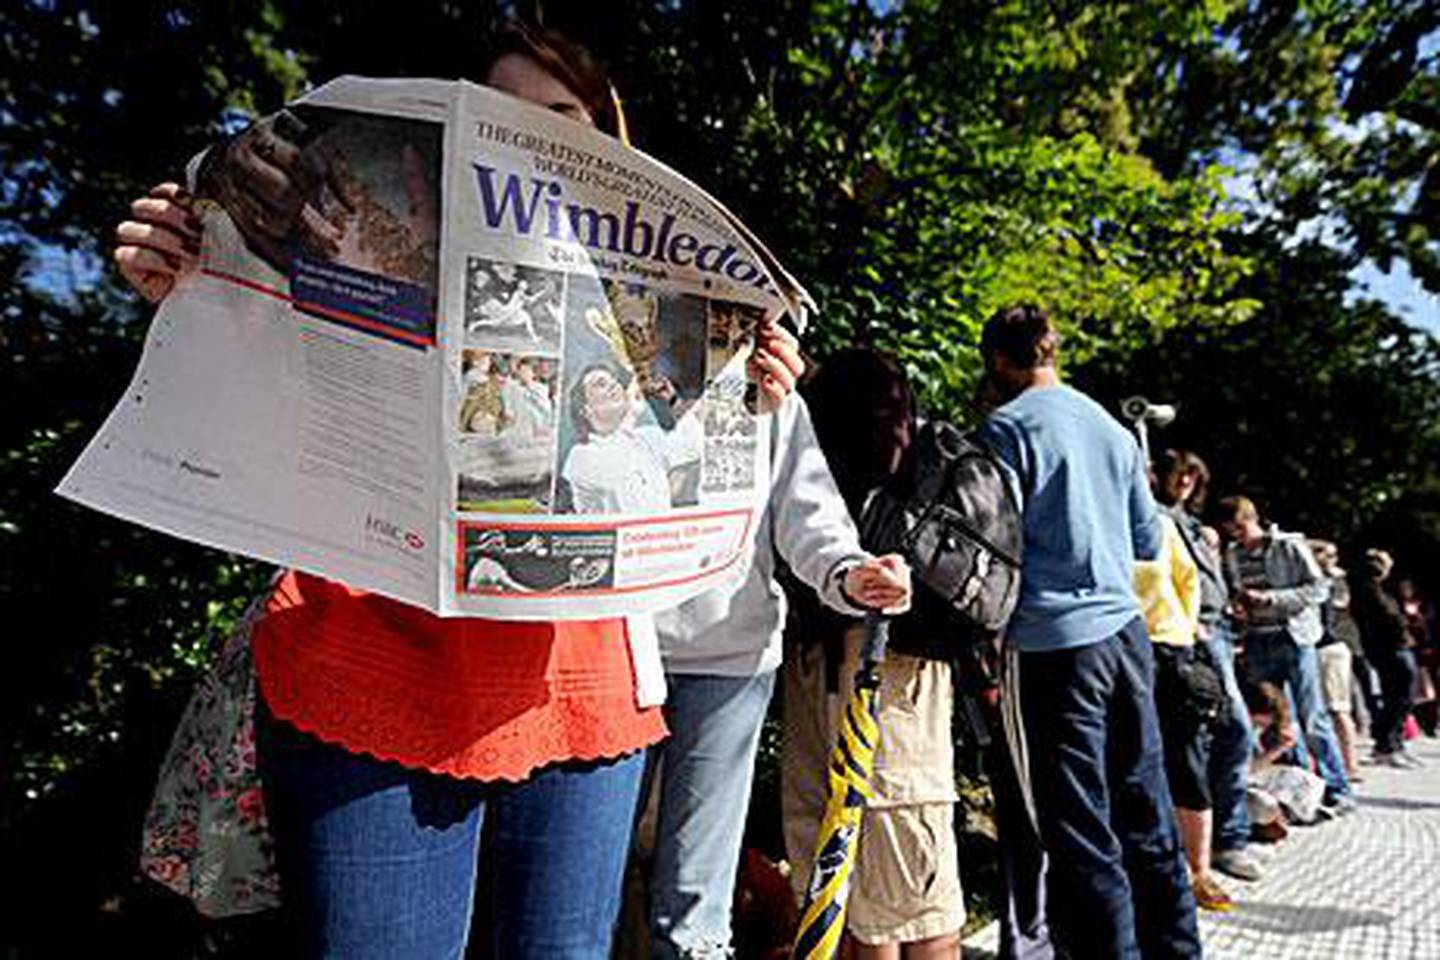 Thousands of tennis fans waited in 'The Queue' in hope of gaining access to Wimbledon. 